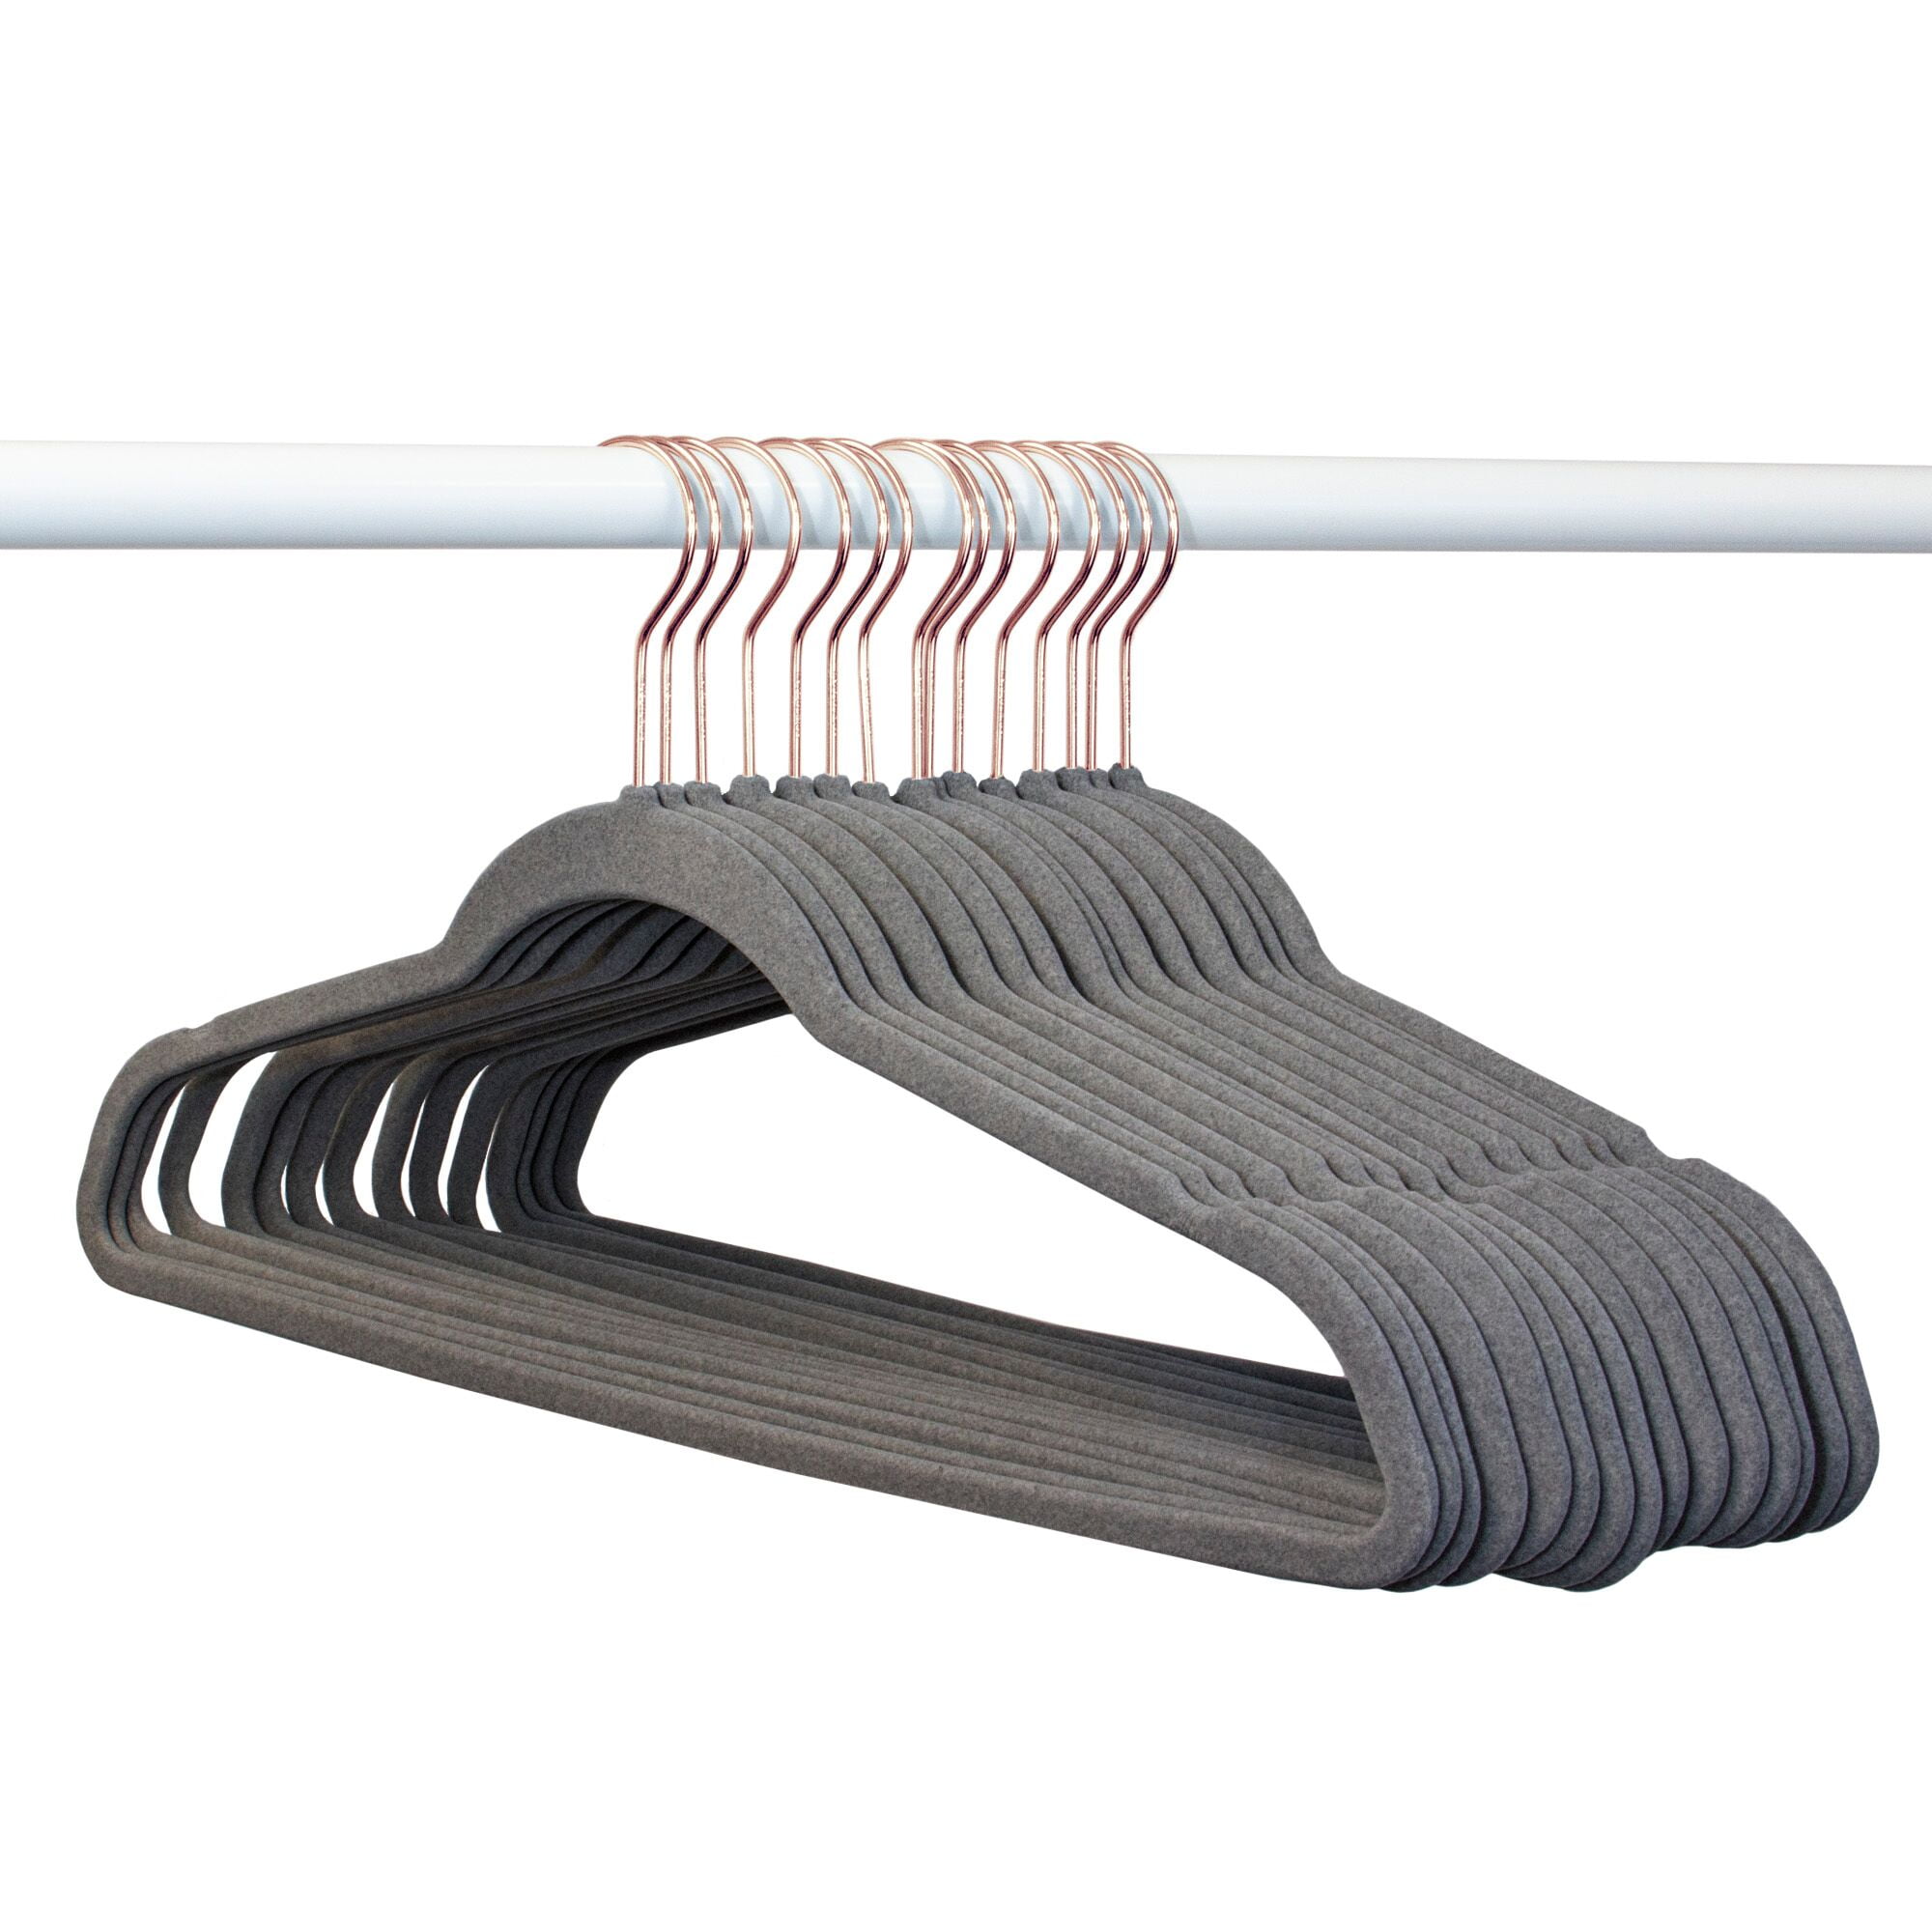 Closet Complete 50 Pack 'Heather Look' Velvet hangers - Heather Grey Chrome  Hooks (more colors available) 